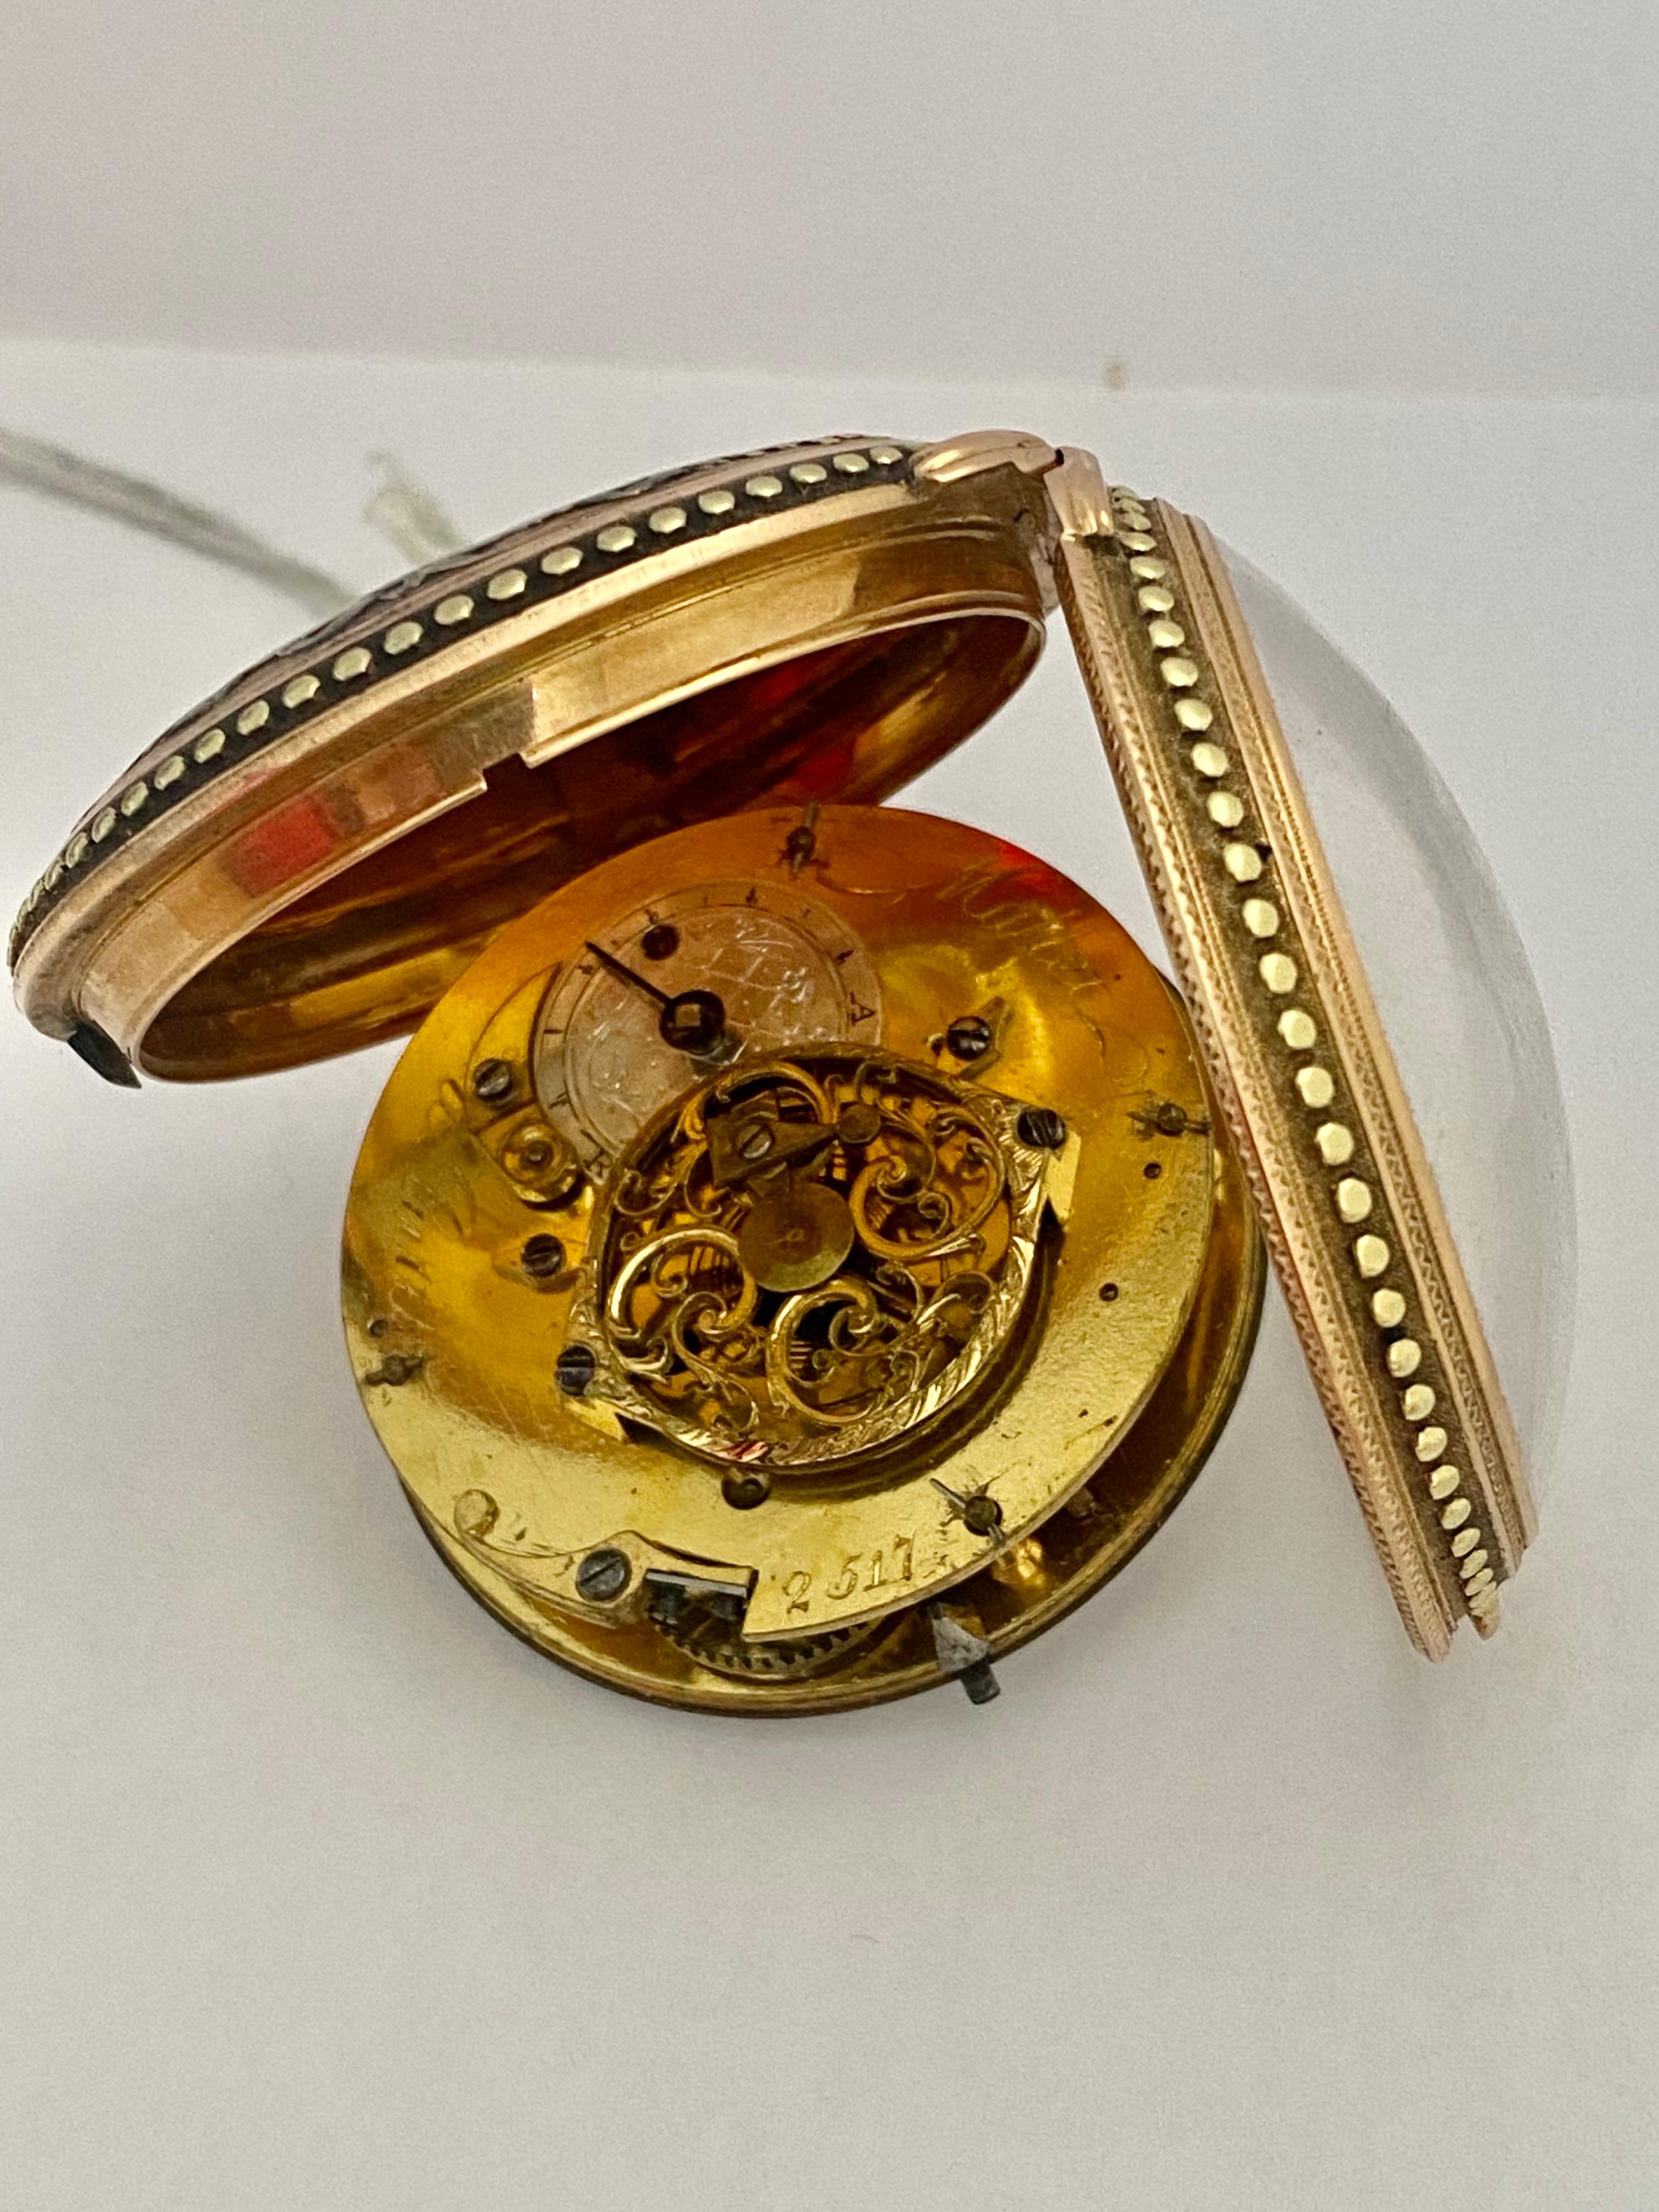 Rare & Early Verge Fusee 18 Karat Tri-Color Gold Pocket Watch by Mallet a Paris For Sale 3